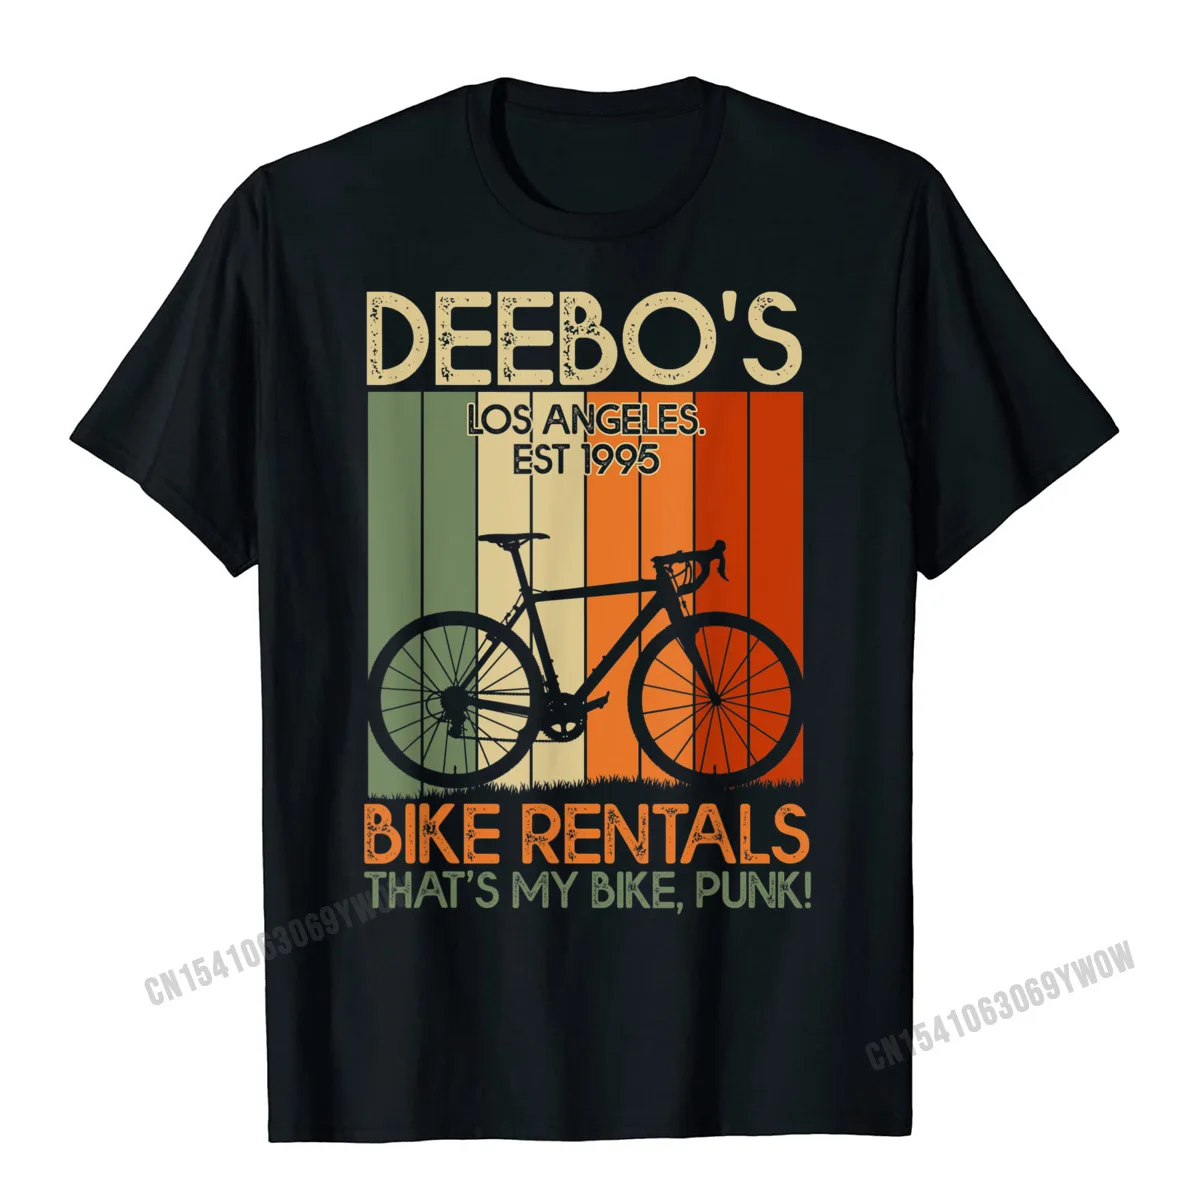 

Vintage Deebos Bike Rentals Funny Bike Rider Gifts T-Shirt Men T Shirts Camisas Casual New Cotton Tops Shirt 3d Printed For Men